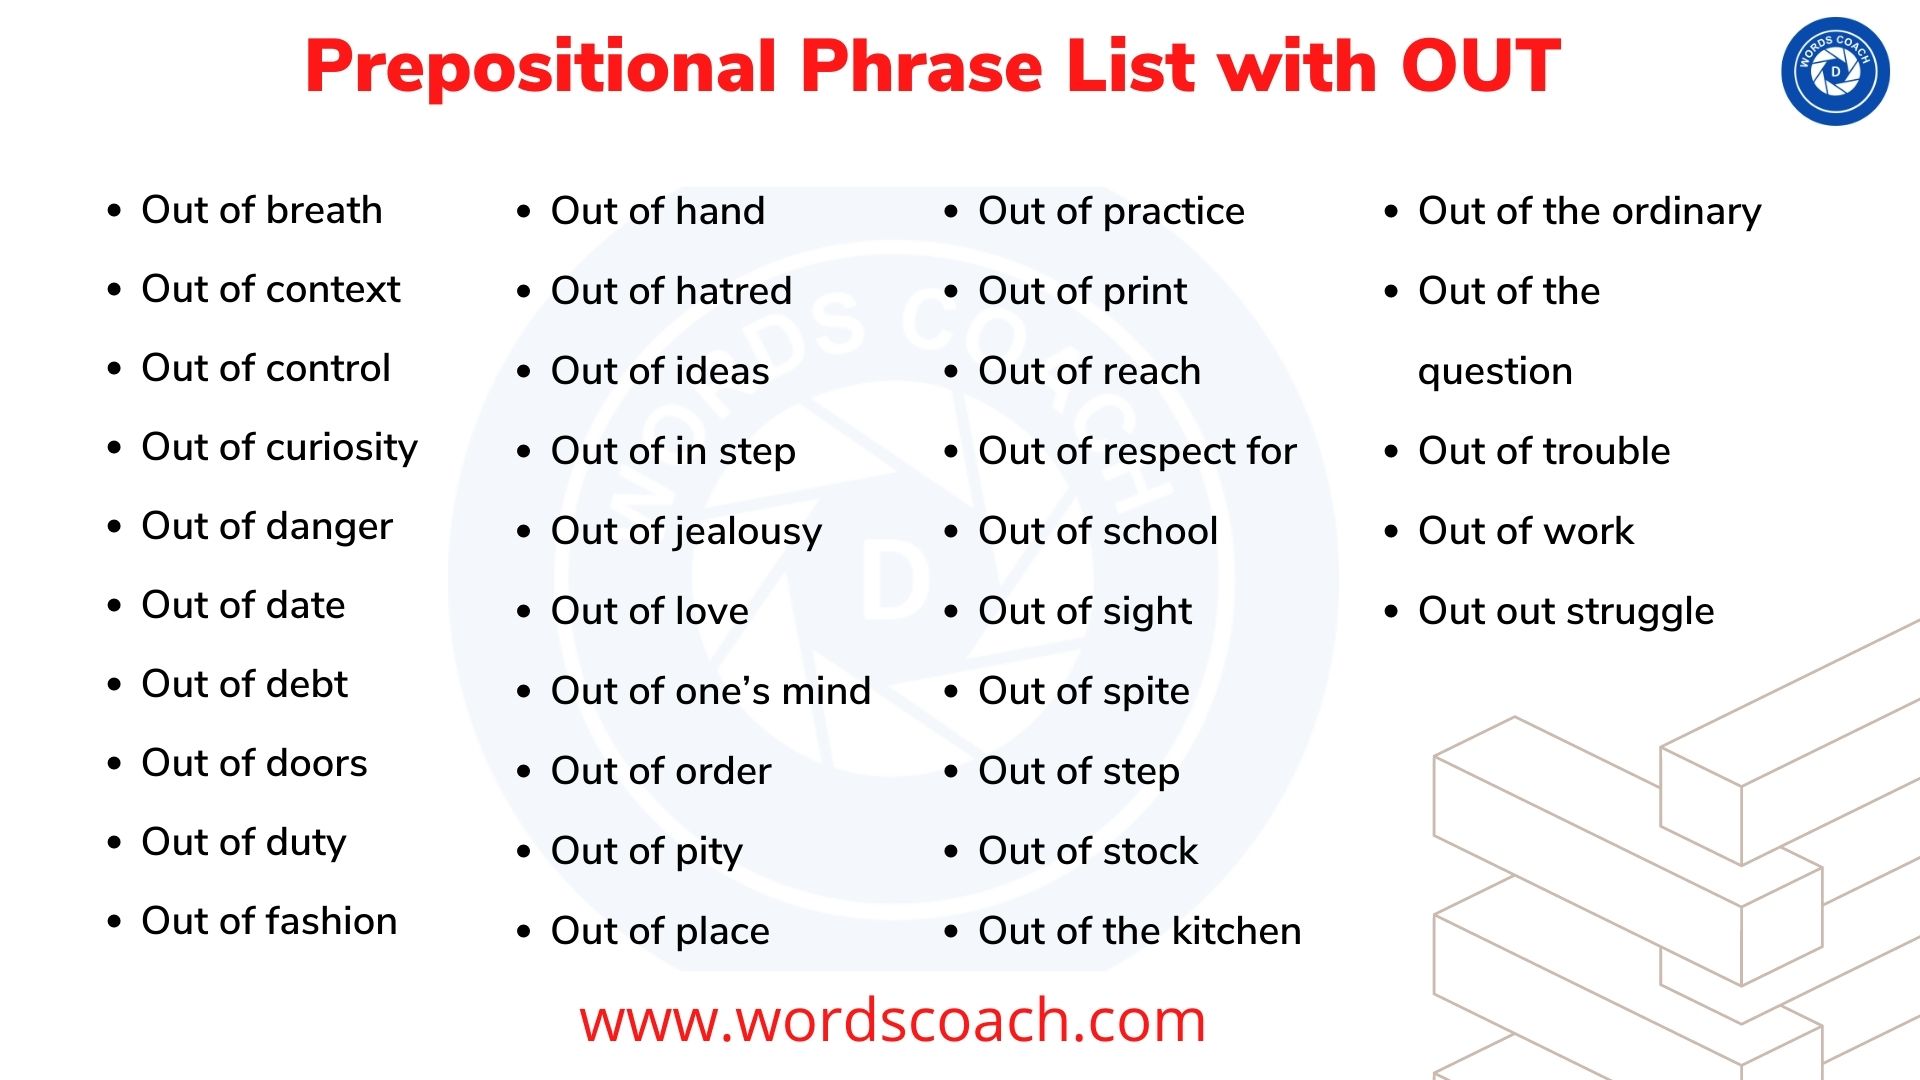 List of Prepositional Phrases with OUT.